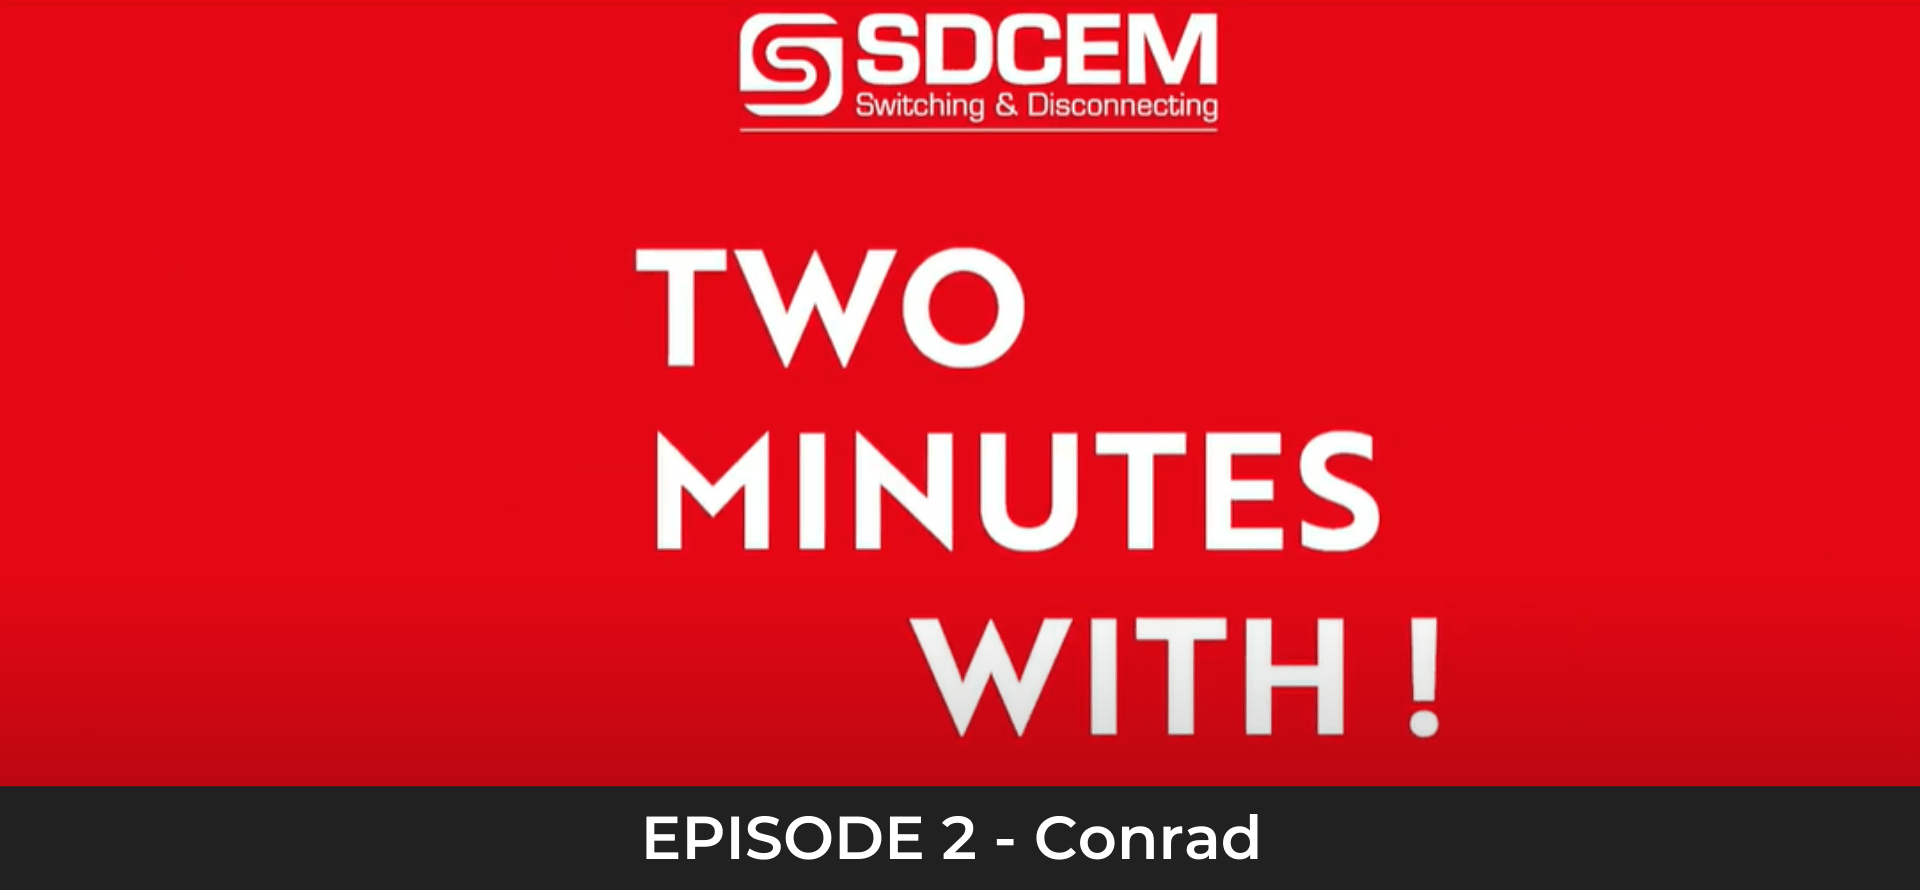 You are currently viewing Vidéo : Two minutes with ! Episode 2 – Interview de Conrad